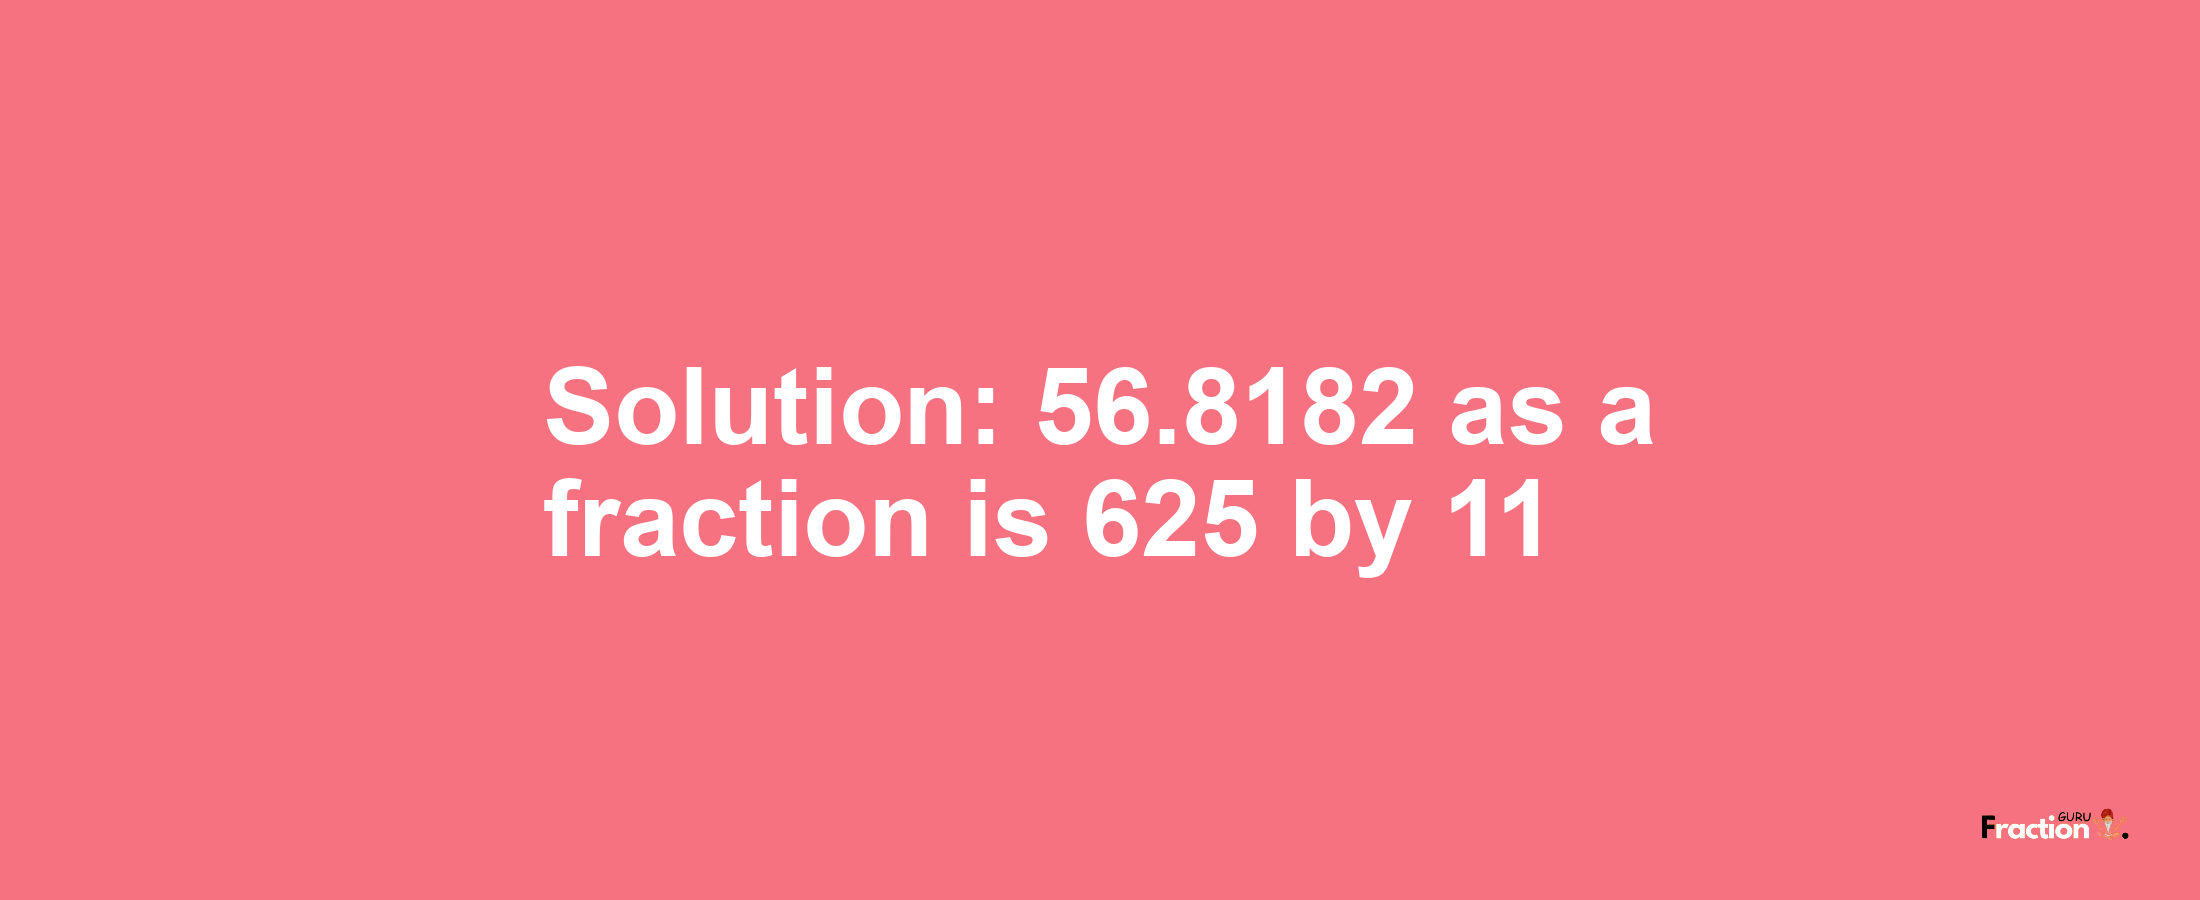 Solution:56.8182 as a fraction is 625/11